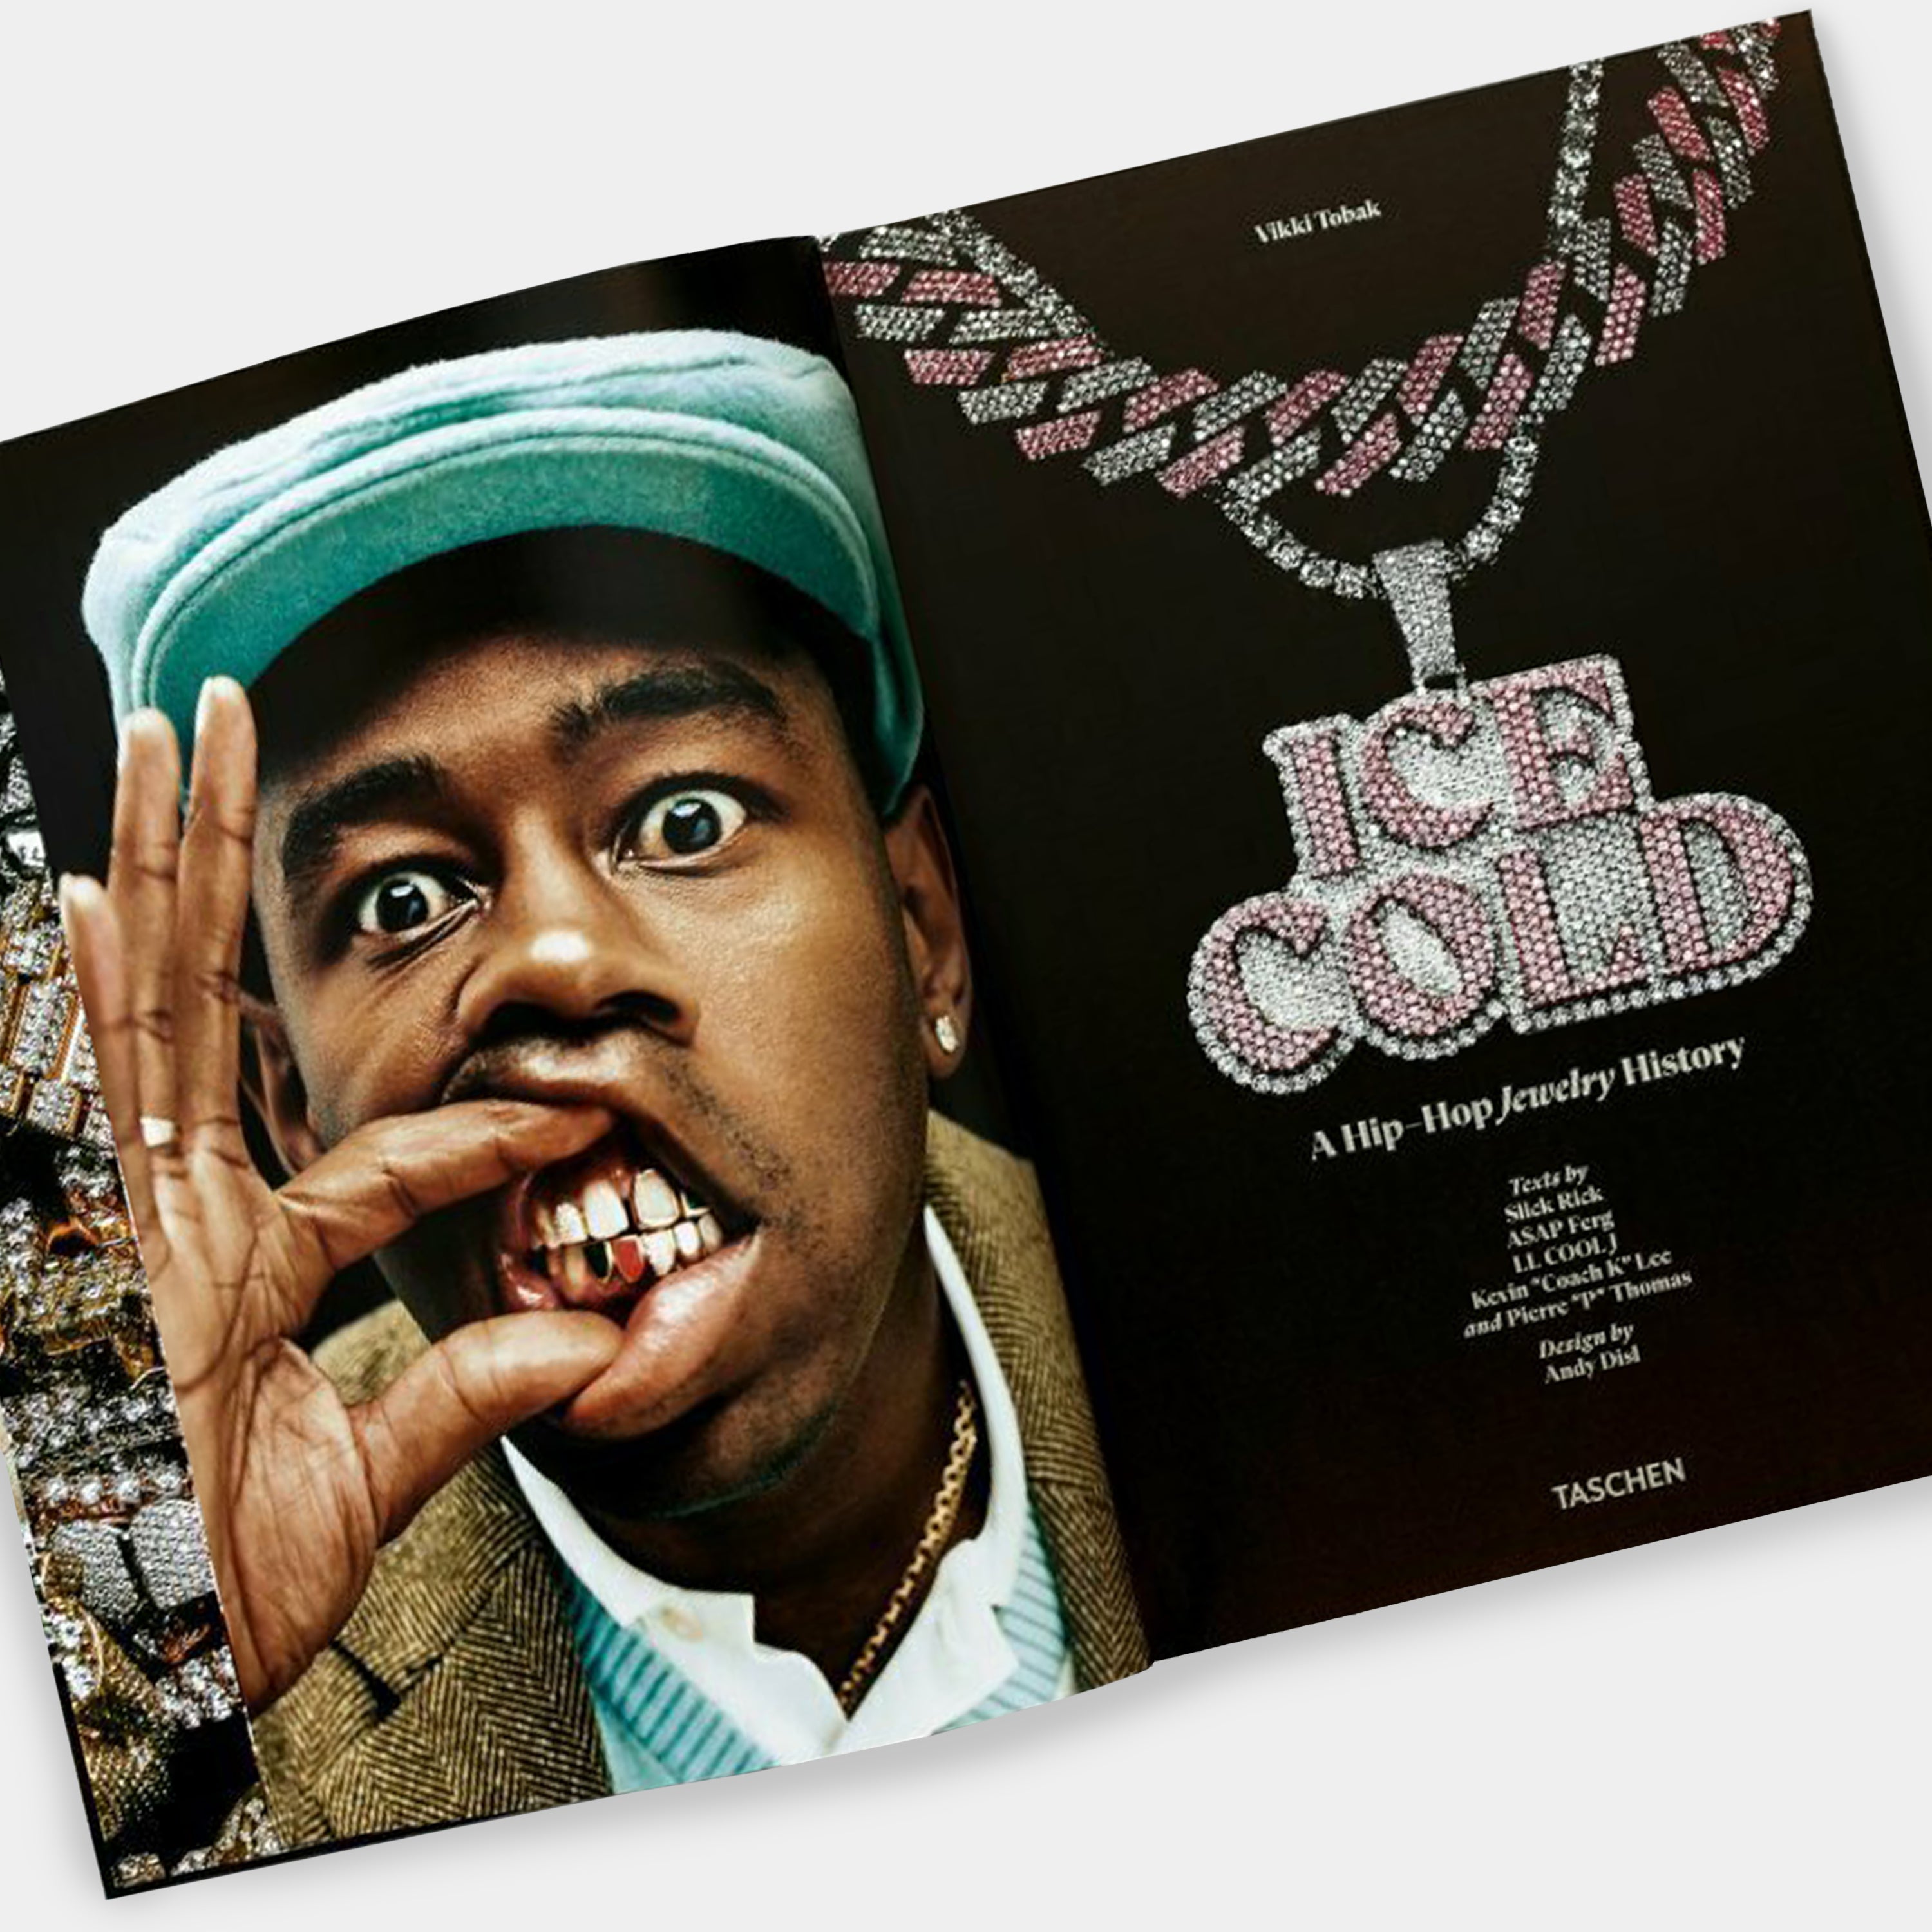 Ice Cold. A Hip-Hop Jewelry History XL Taschen Book